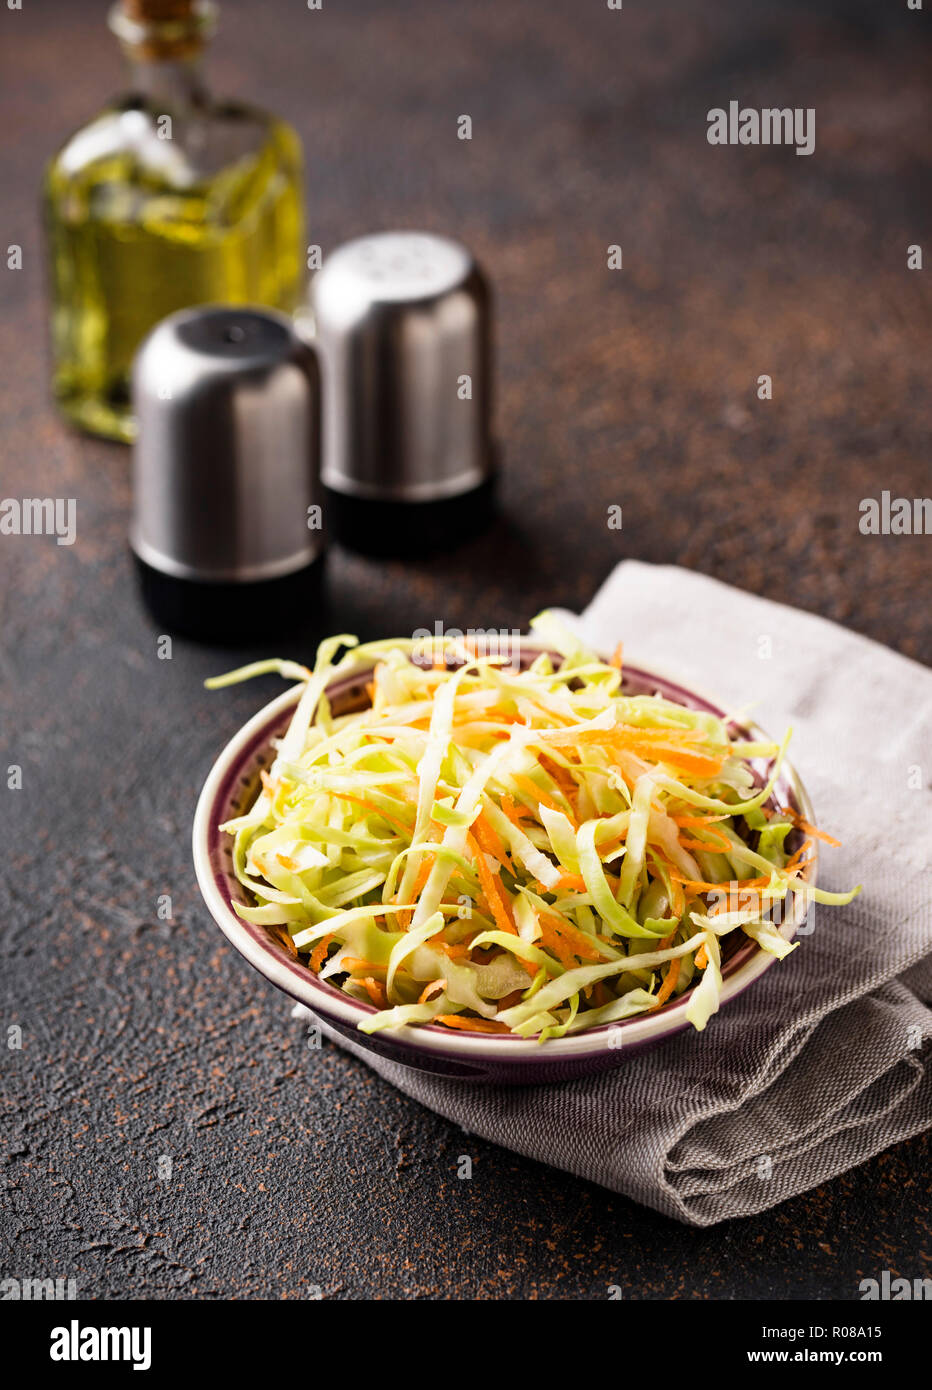 Coleslaw with cabbage, traditional American salad Stock Photo